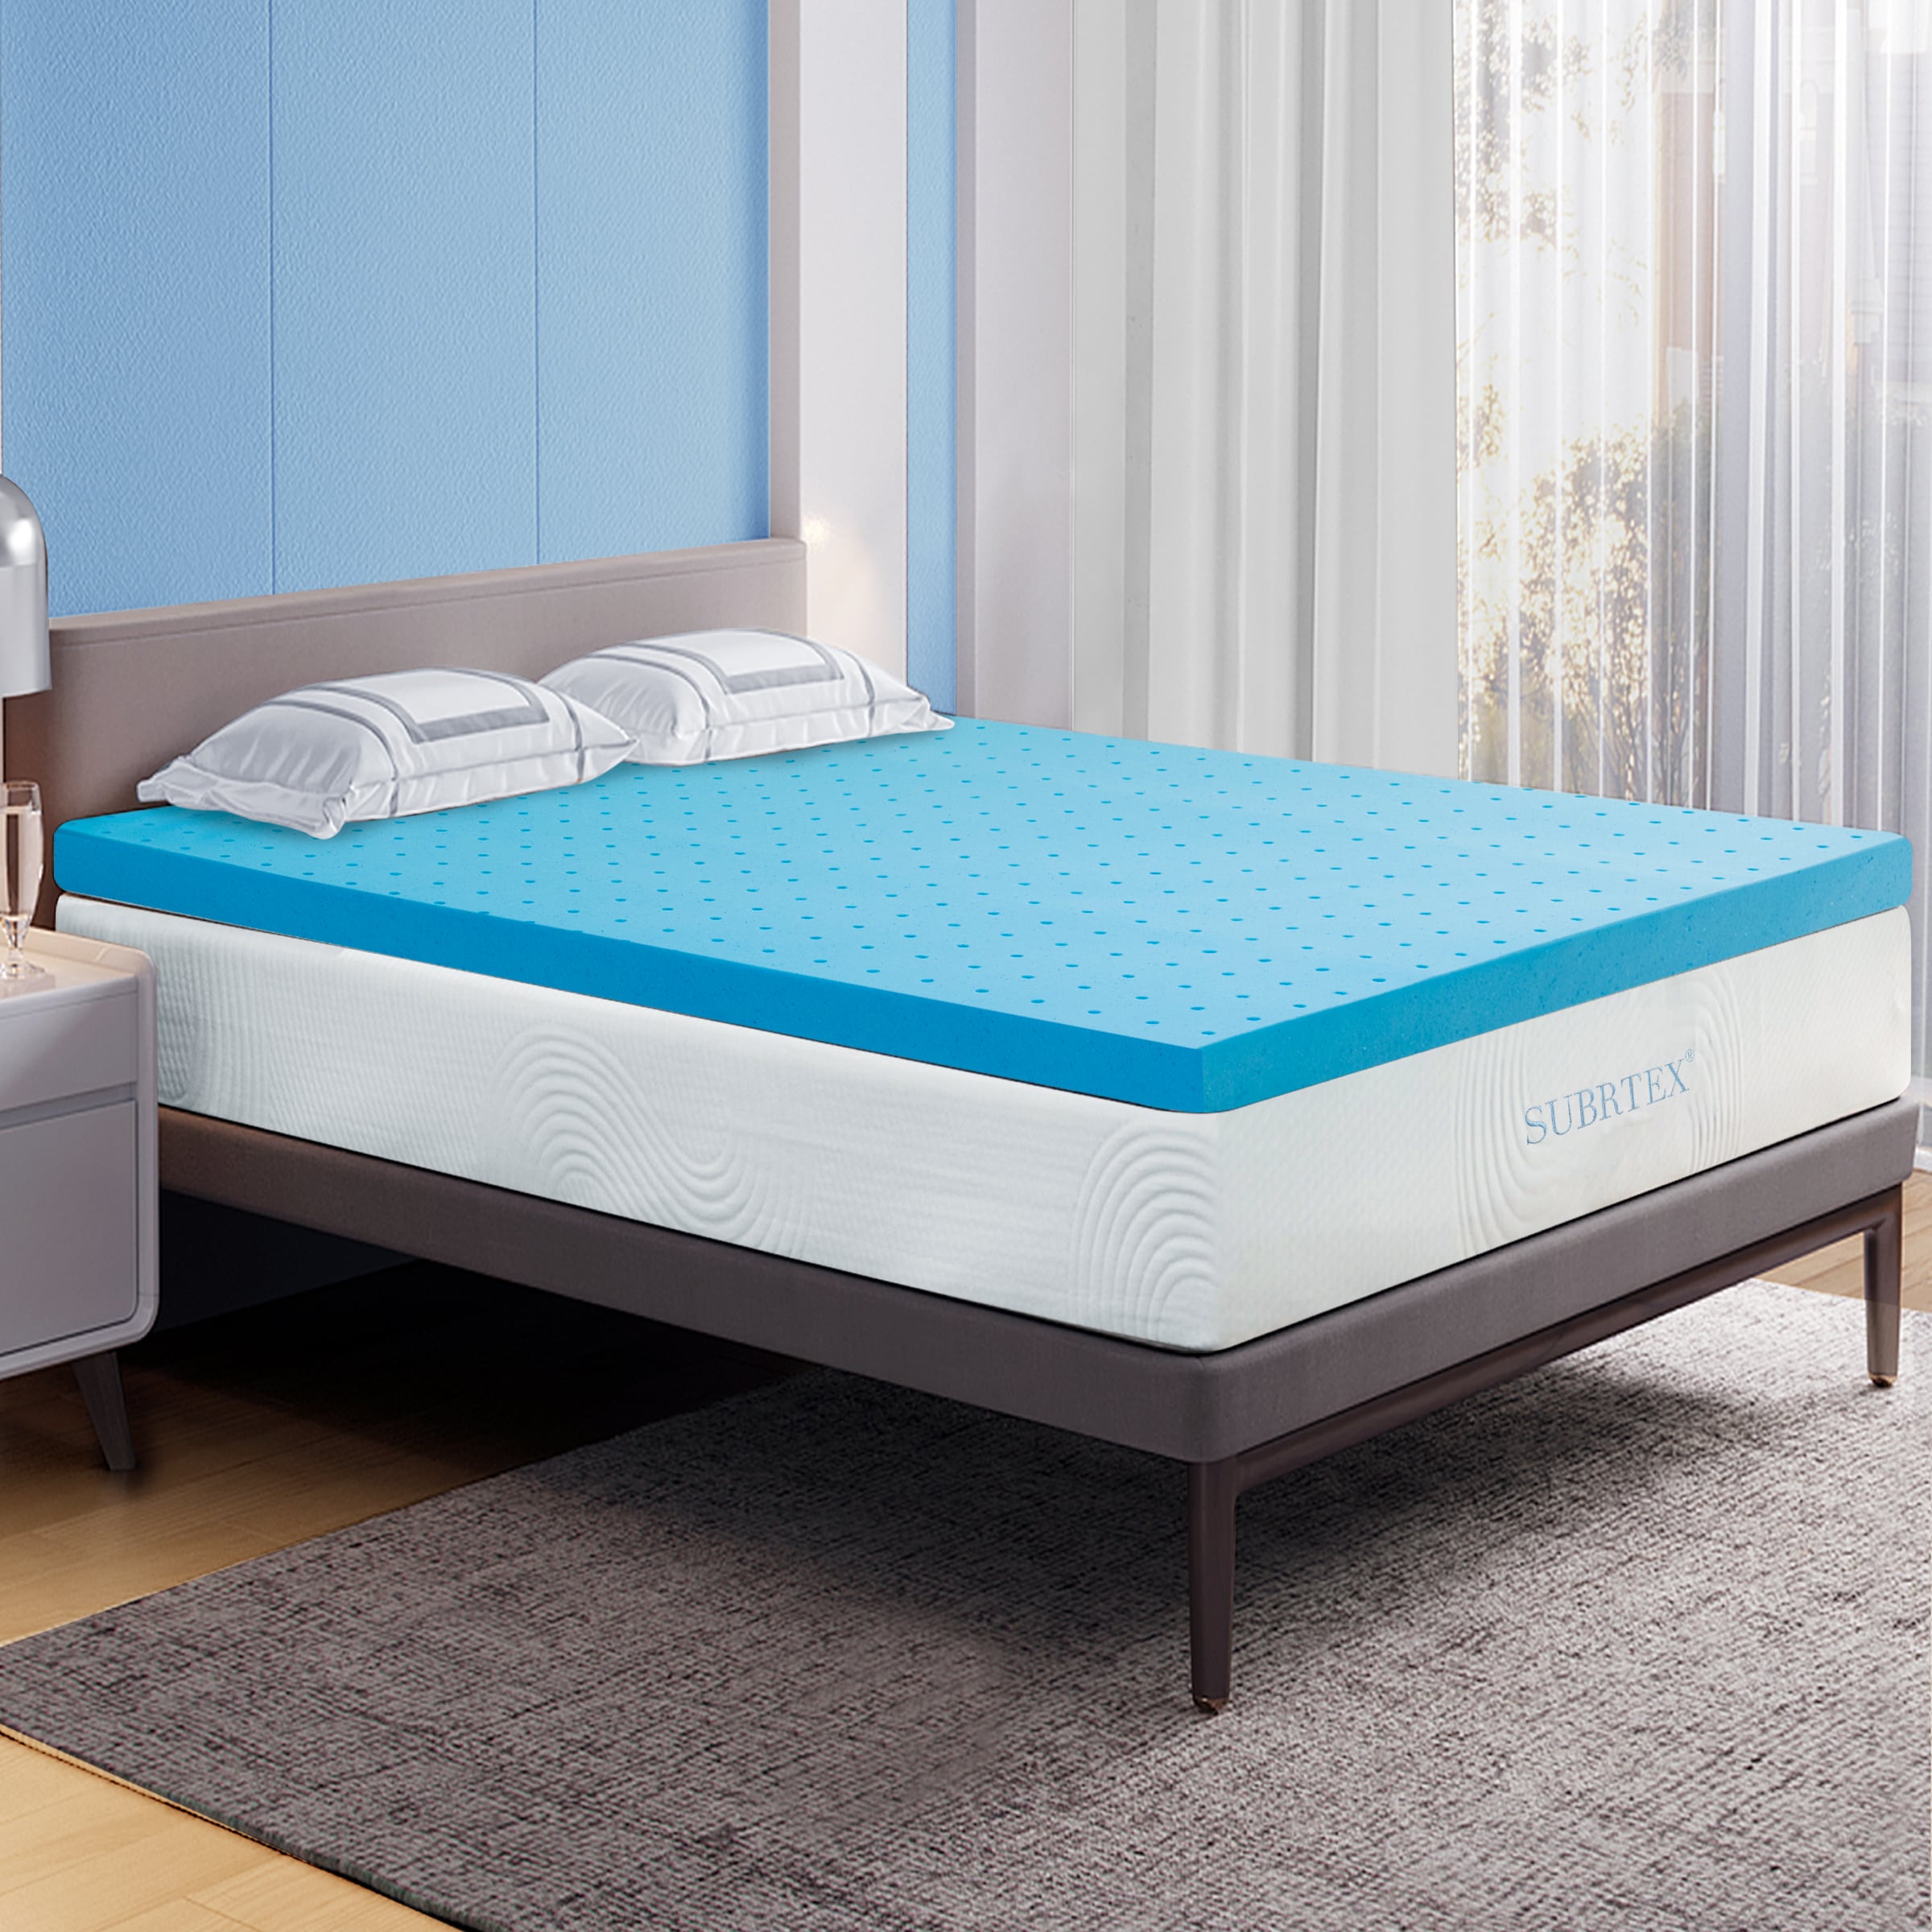 Umoderne stil Prædike Subrtex High Density Cooling 3" Gel Memory Foam Mattress Topper (King) in  the Mattress Covers & Toppers department at Lowes.com